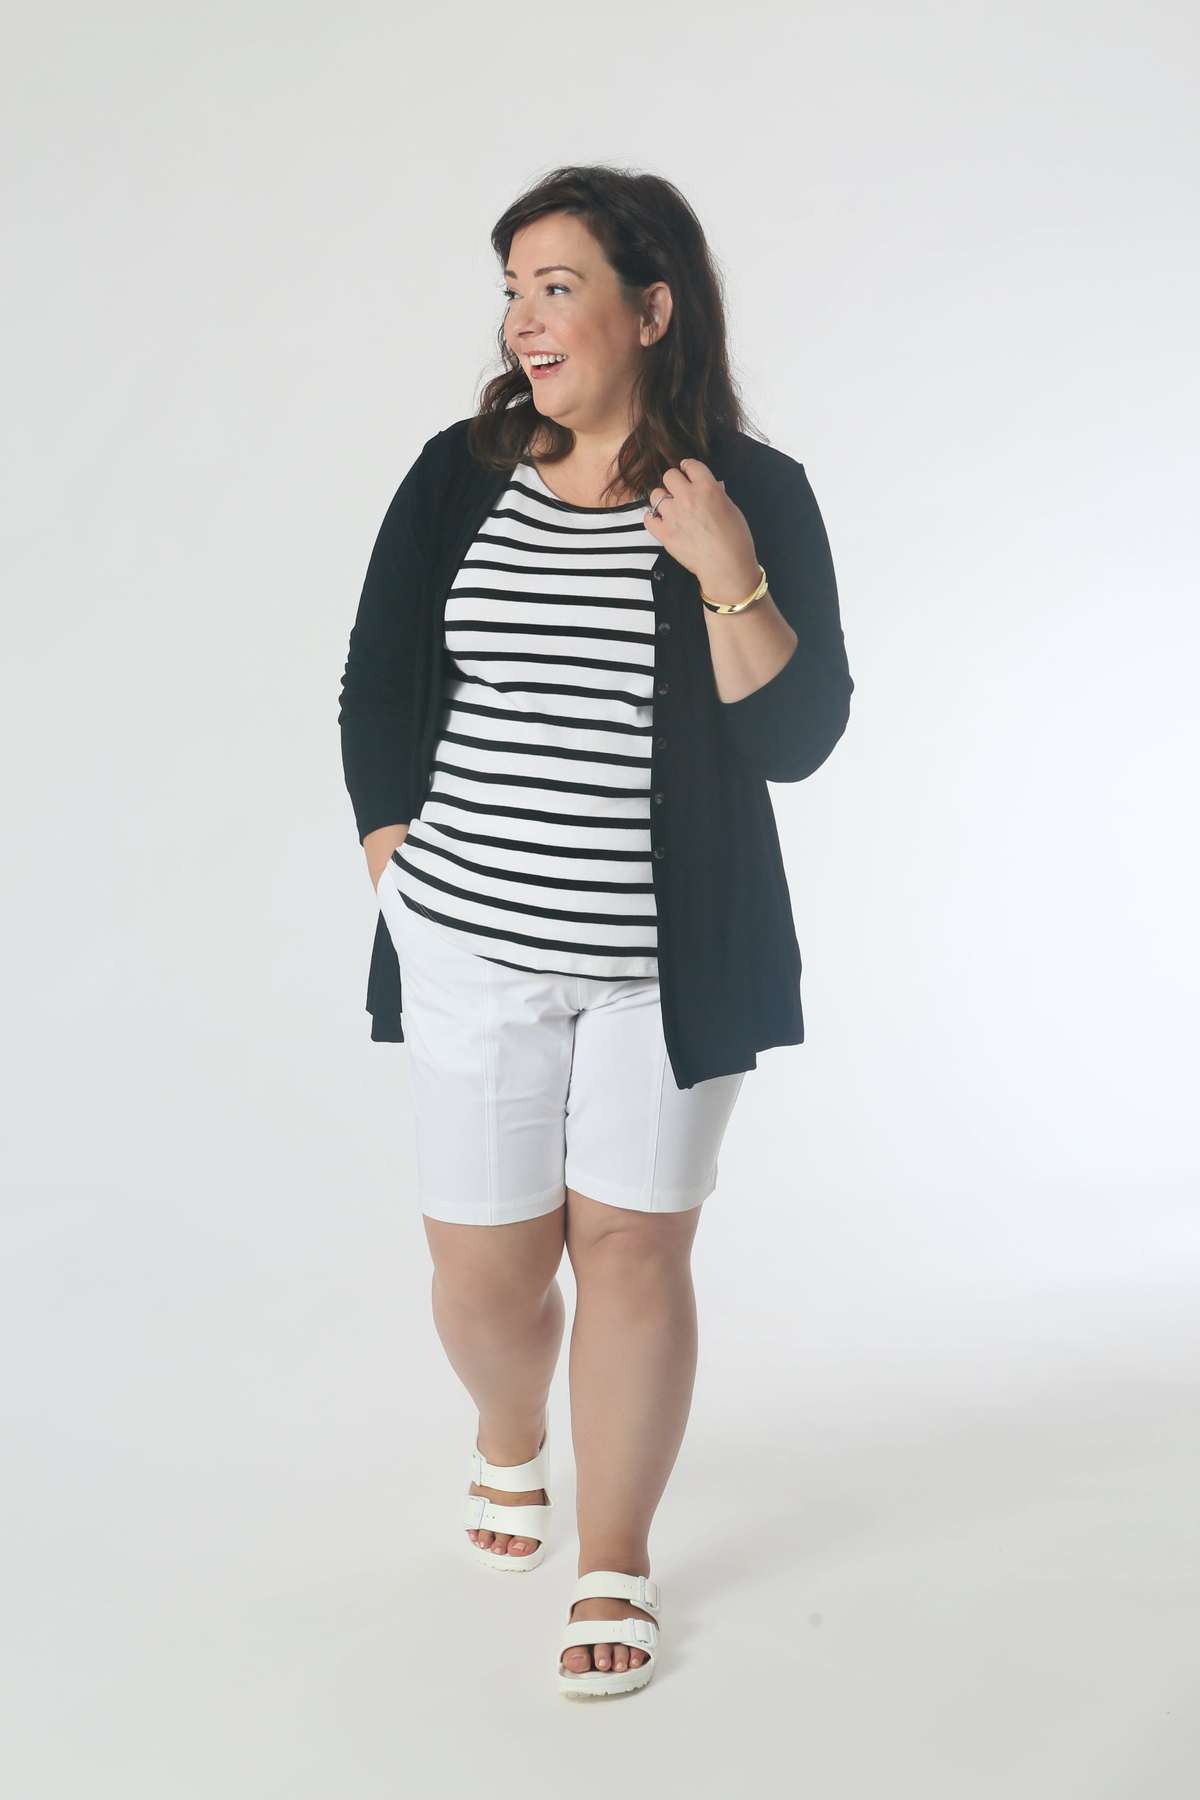 On a Boat: Pair the striped tee and shorts with the cardigan for a breezy evening on the water. Keep it casual with water-friendly sandals and add a bracelet for polish.